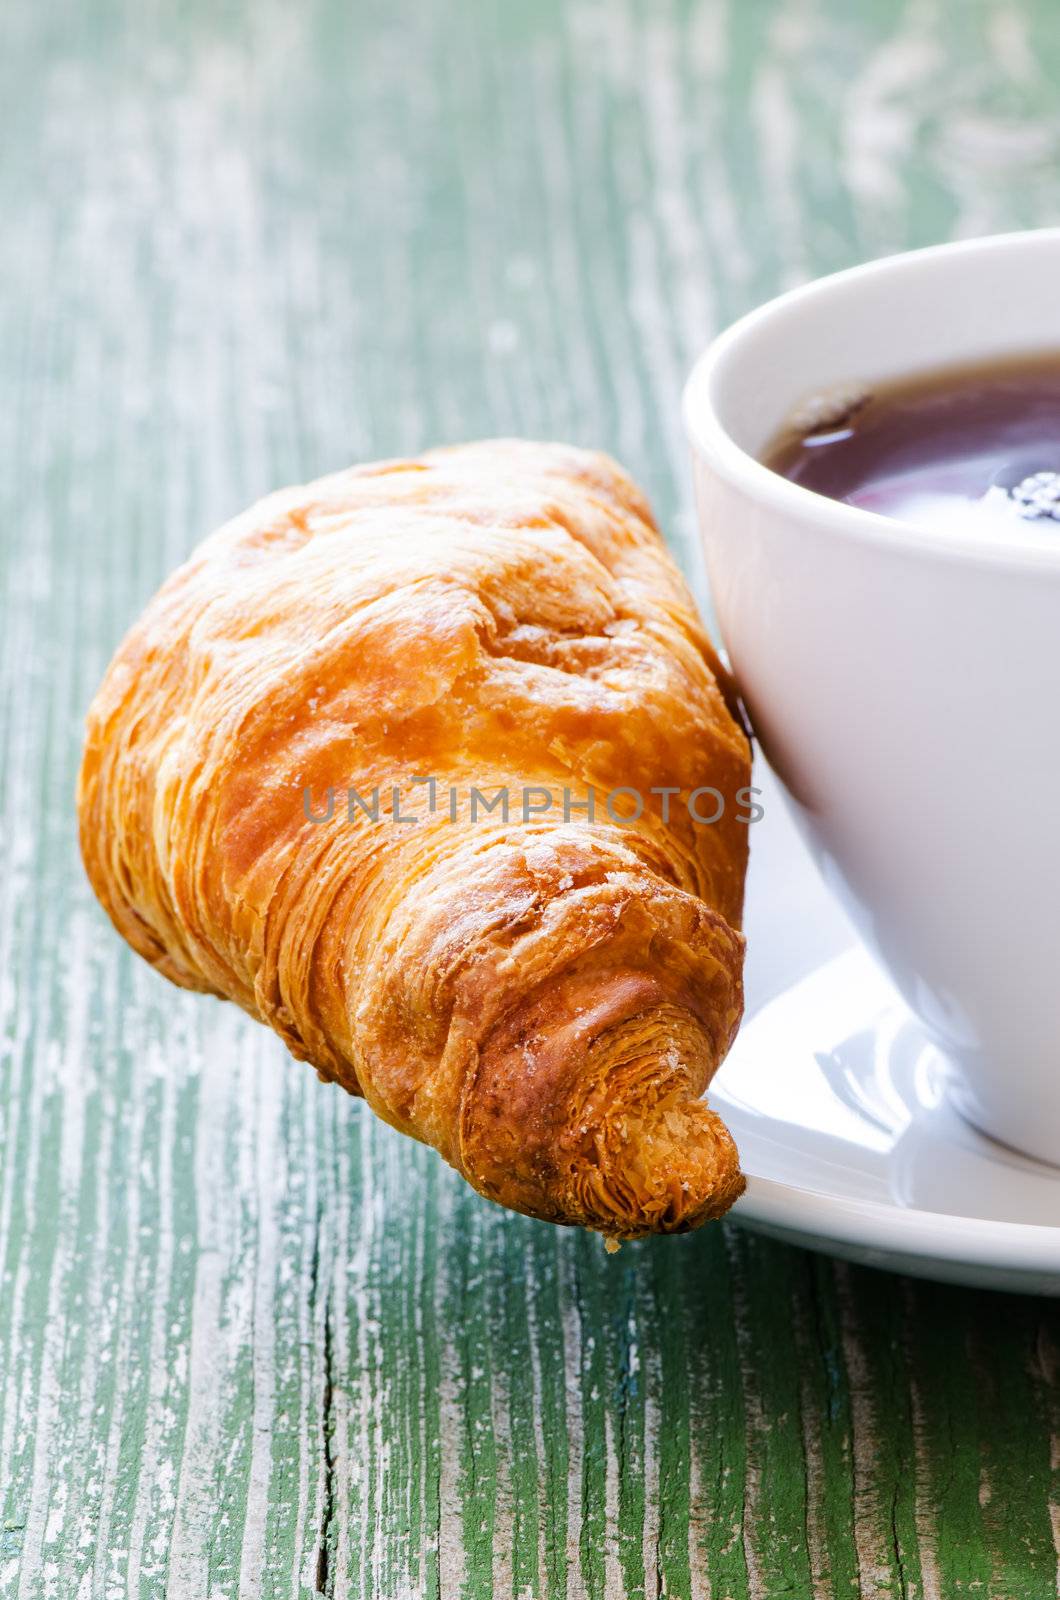 Cup of coffee and croissant on green wooden table